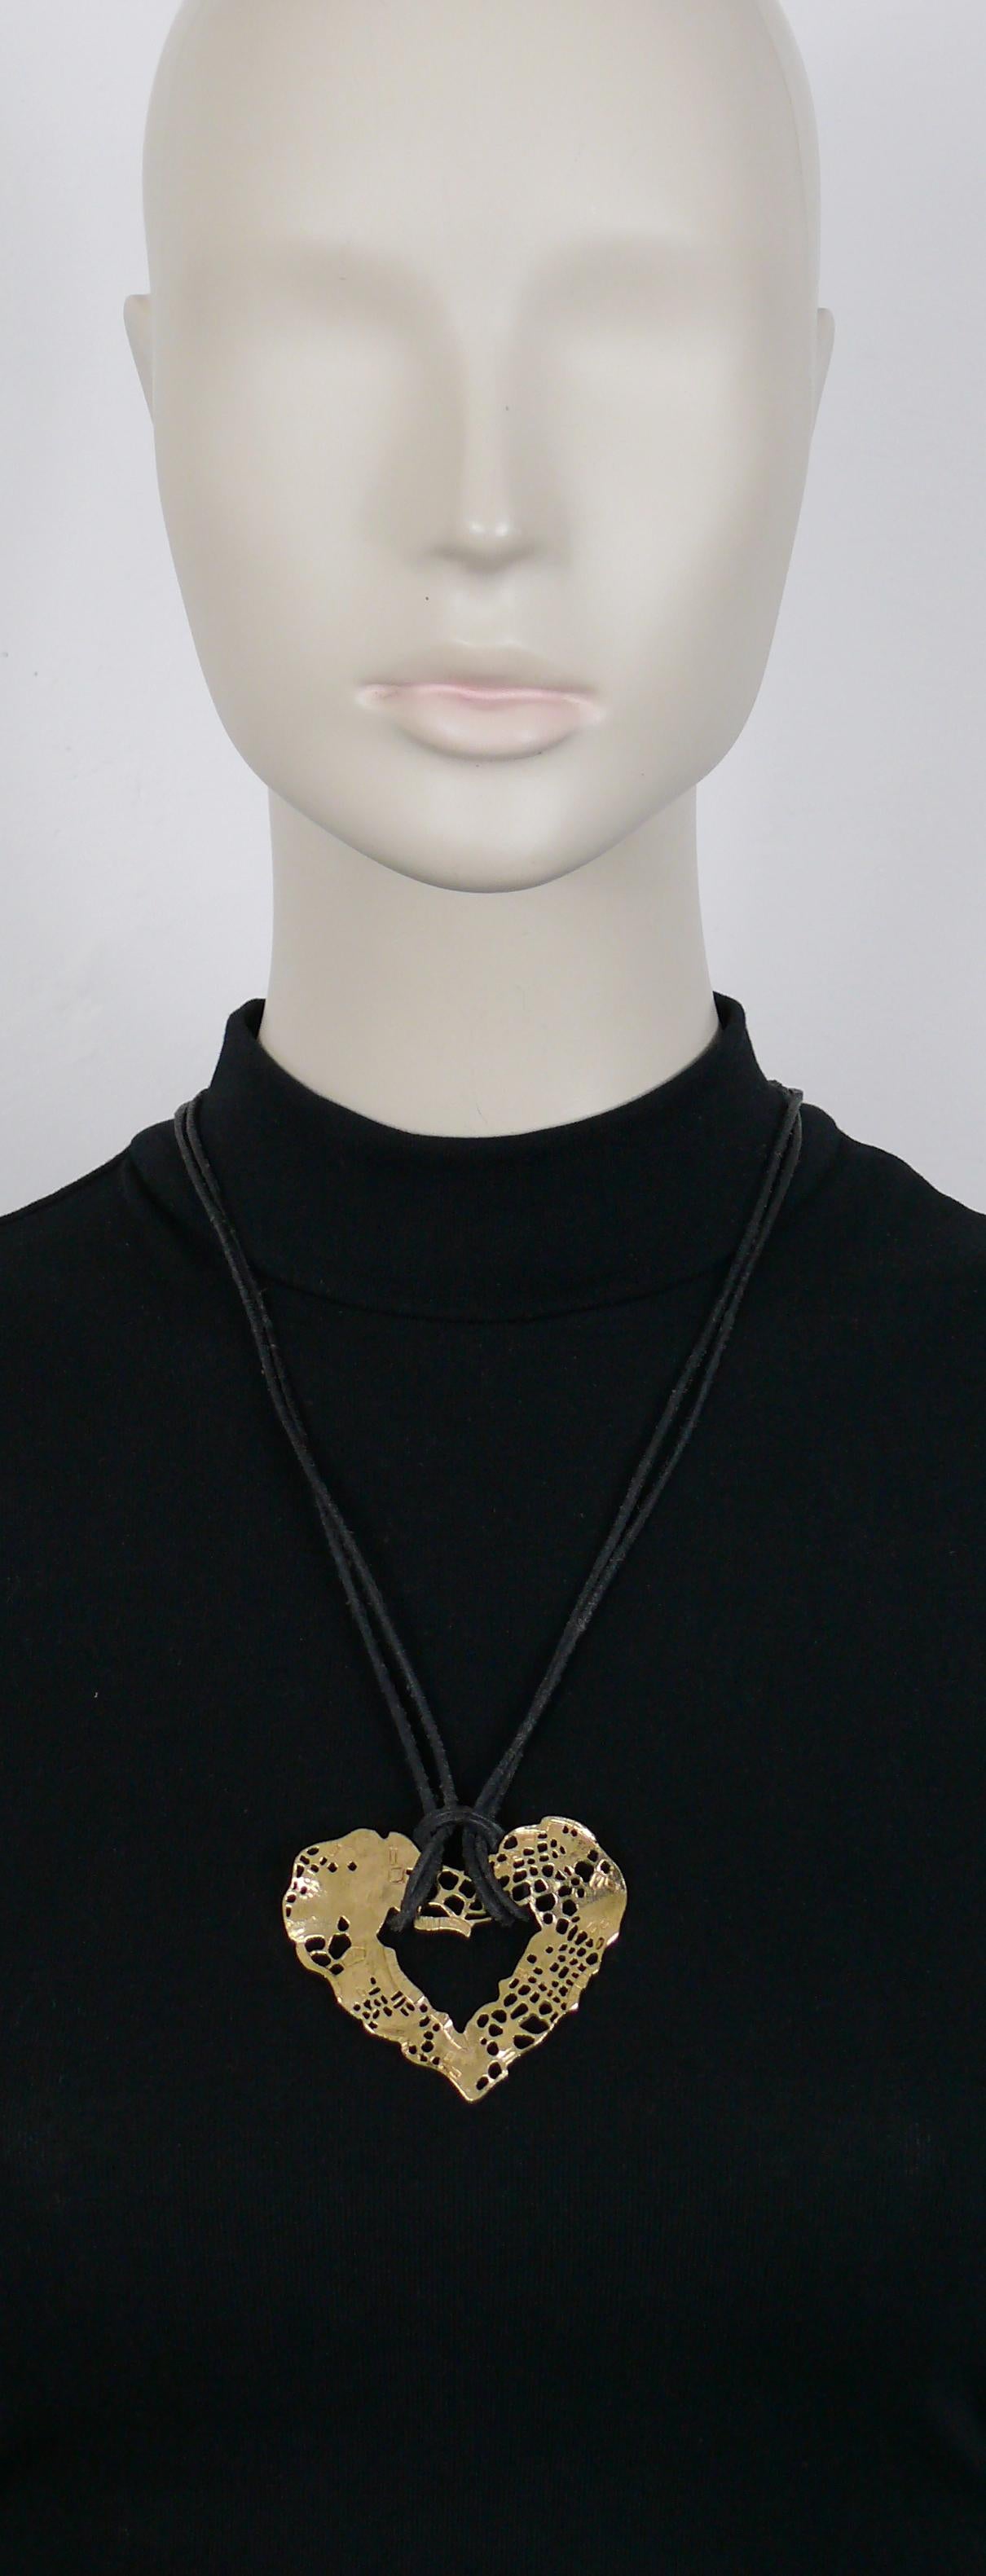 CHRISTIAN LACROIX vintage black leather cords necklace featuring a gold toned perforated heart pendant.

Slips on.
Sliding ball element to to adjust the length.

Marked CHRISTIAN LACROIX CL Made in France.

Indicative measurements : max. wearable